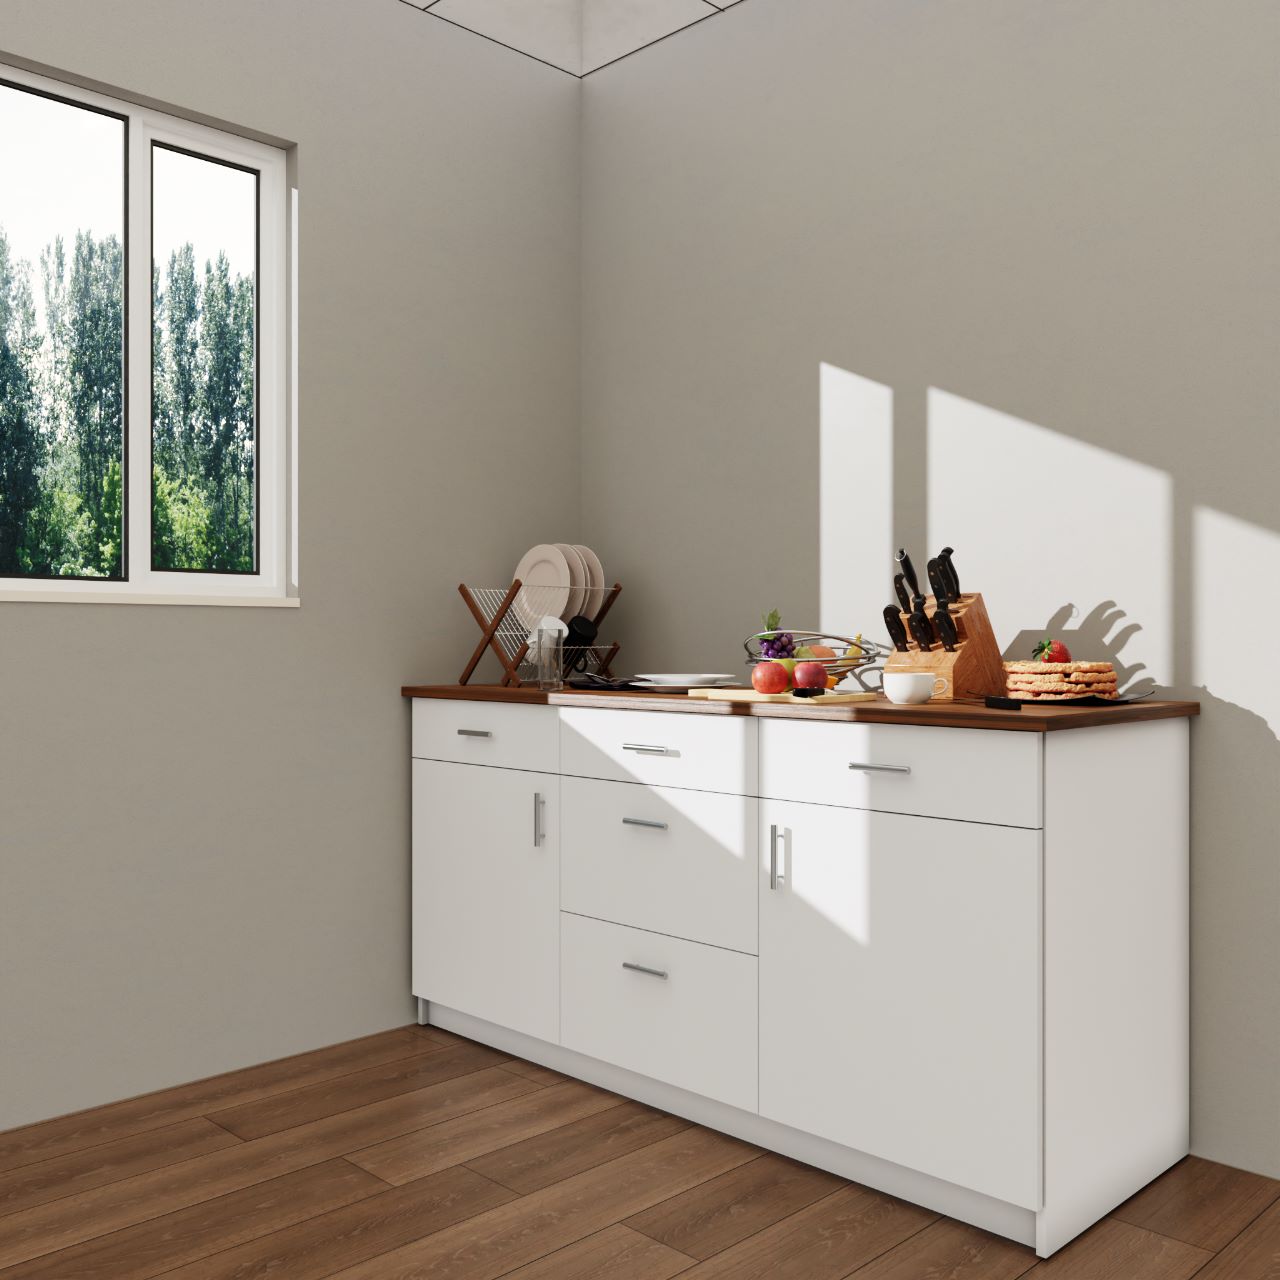 VIKI Kitchen Base Cabinets with 3 Drawer cabin , 2 drawer 2 doors - size : 180x88x60 CM ( Frosty White )